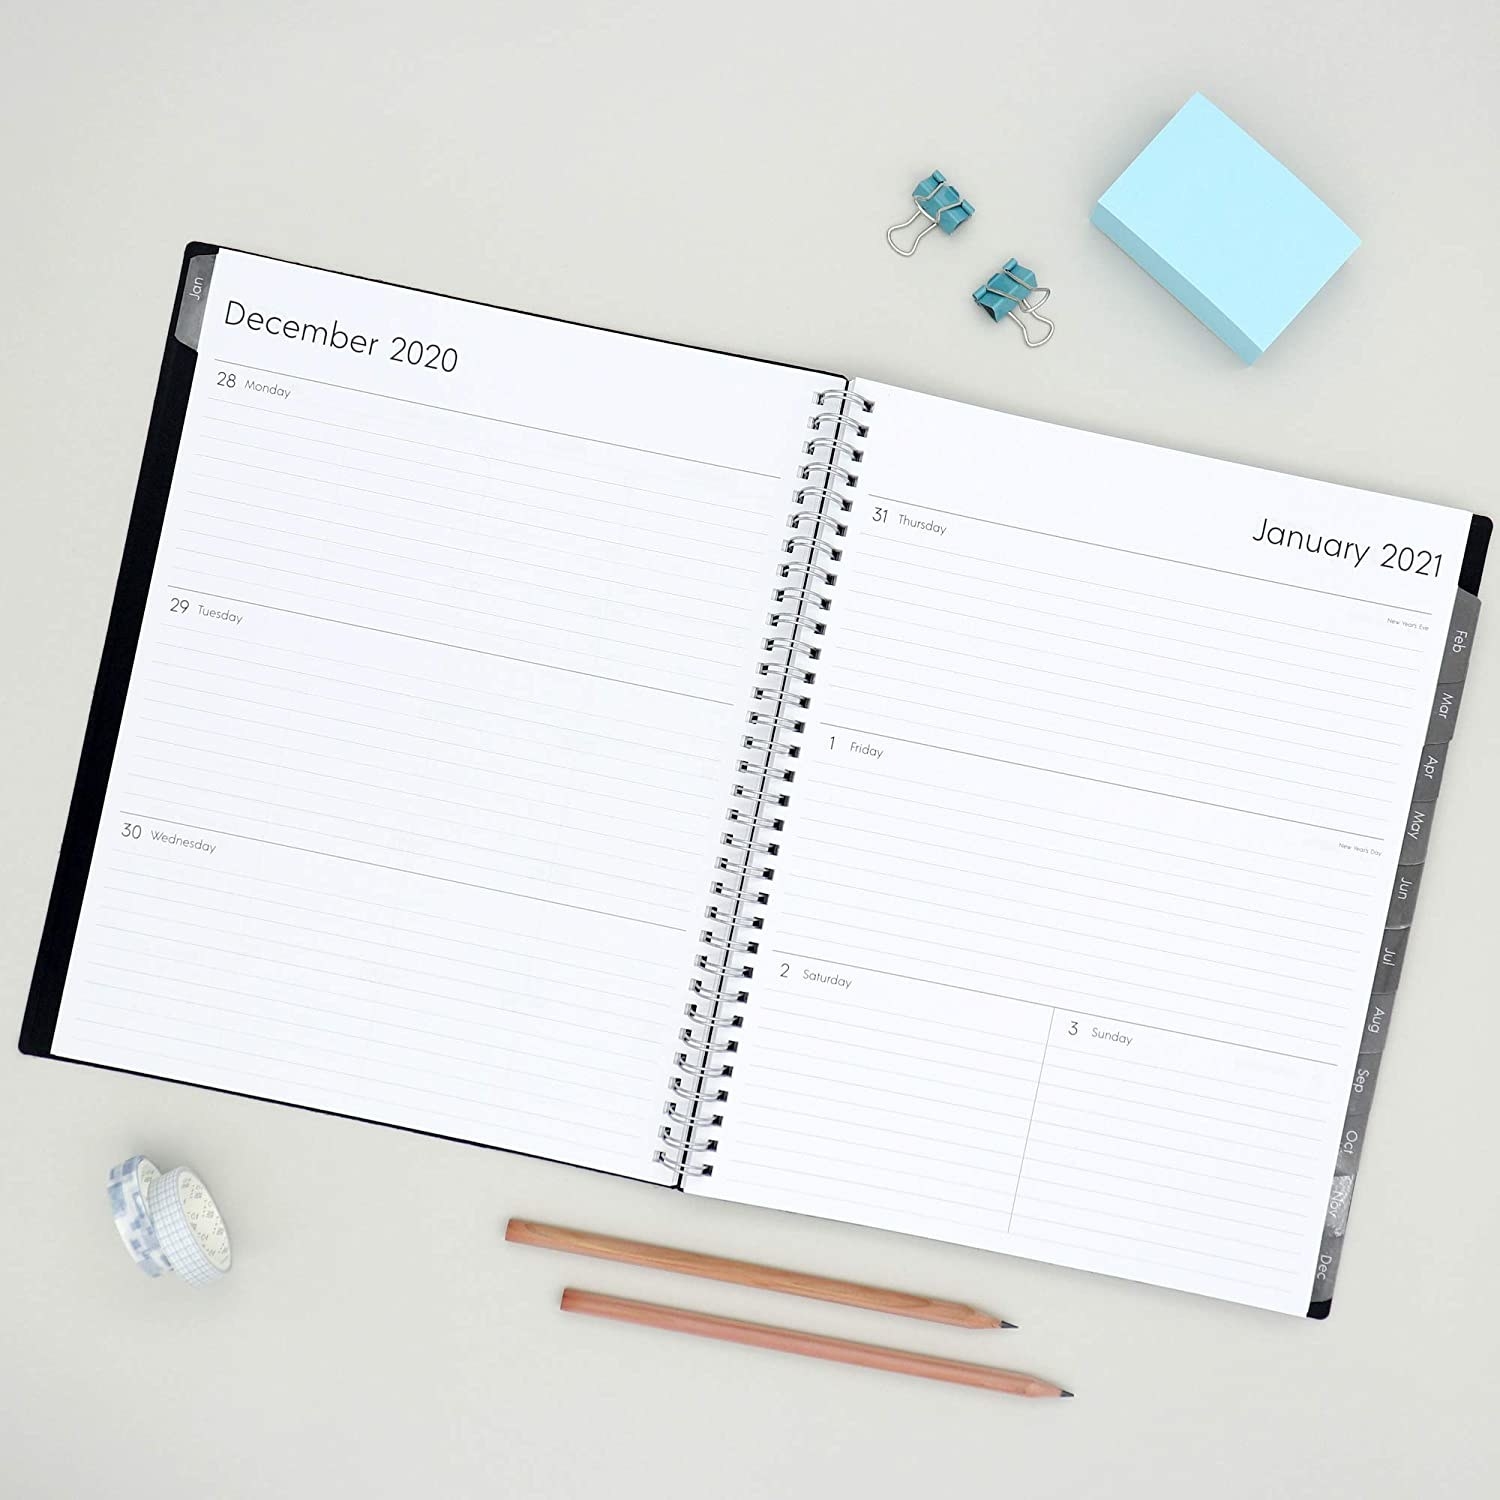 Black planner with lined date pages and tabs for each month on the side open on a desk 